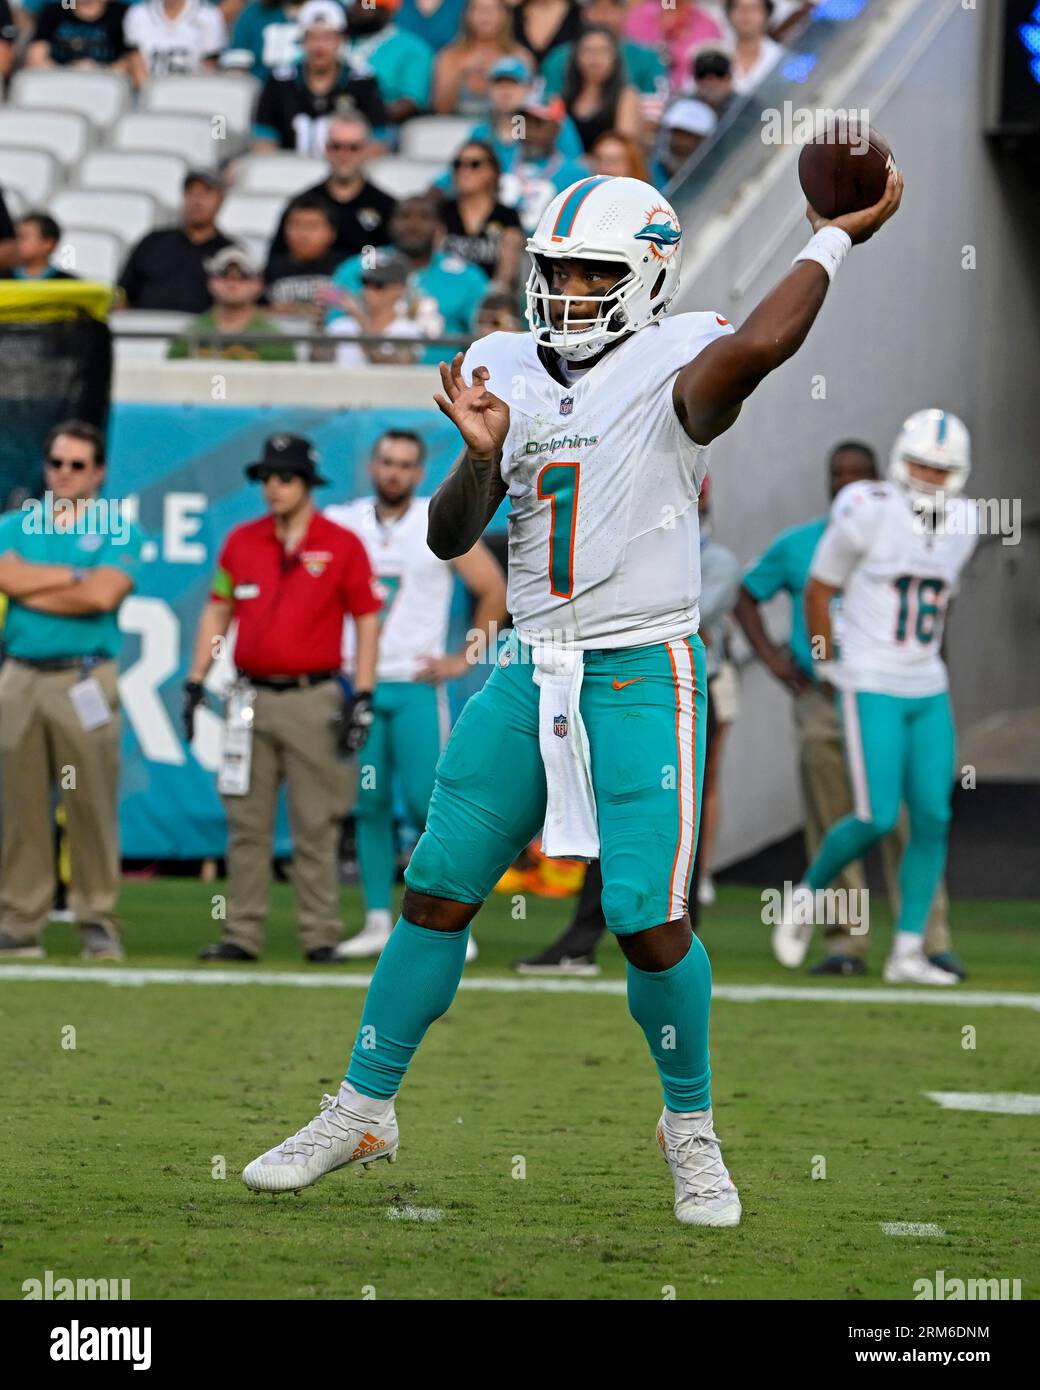 dolphins first preseason game